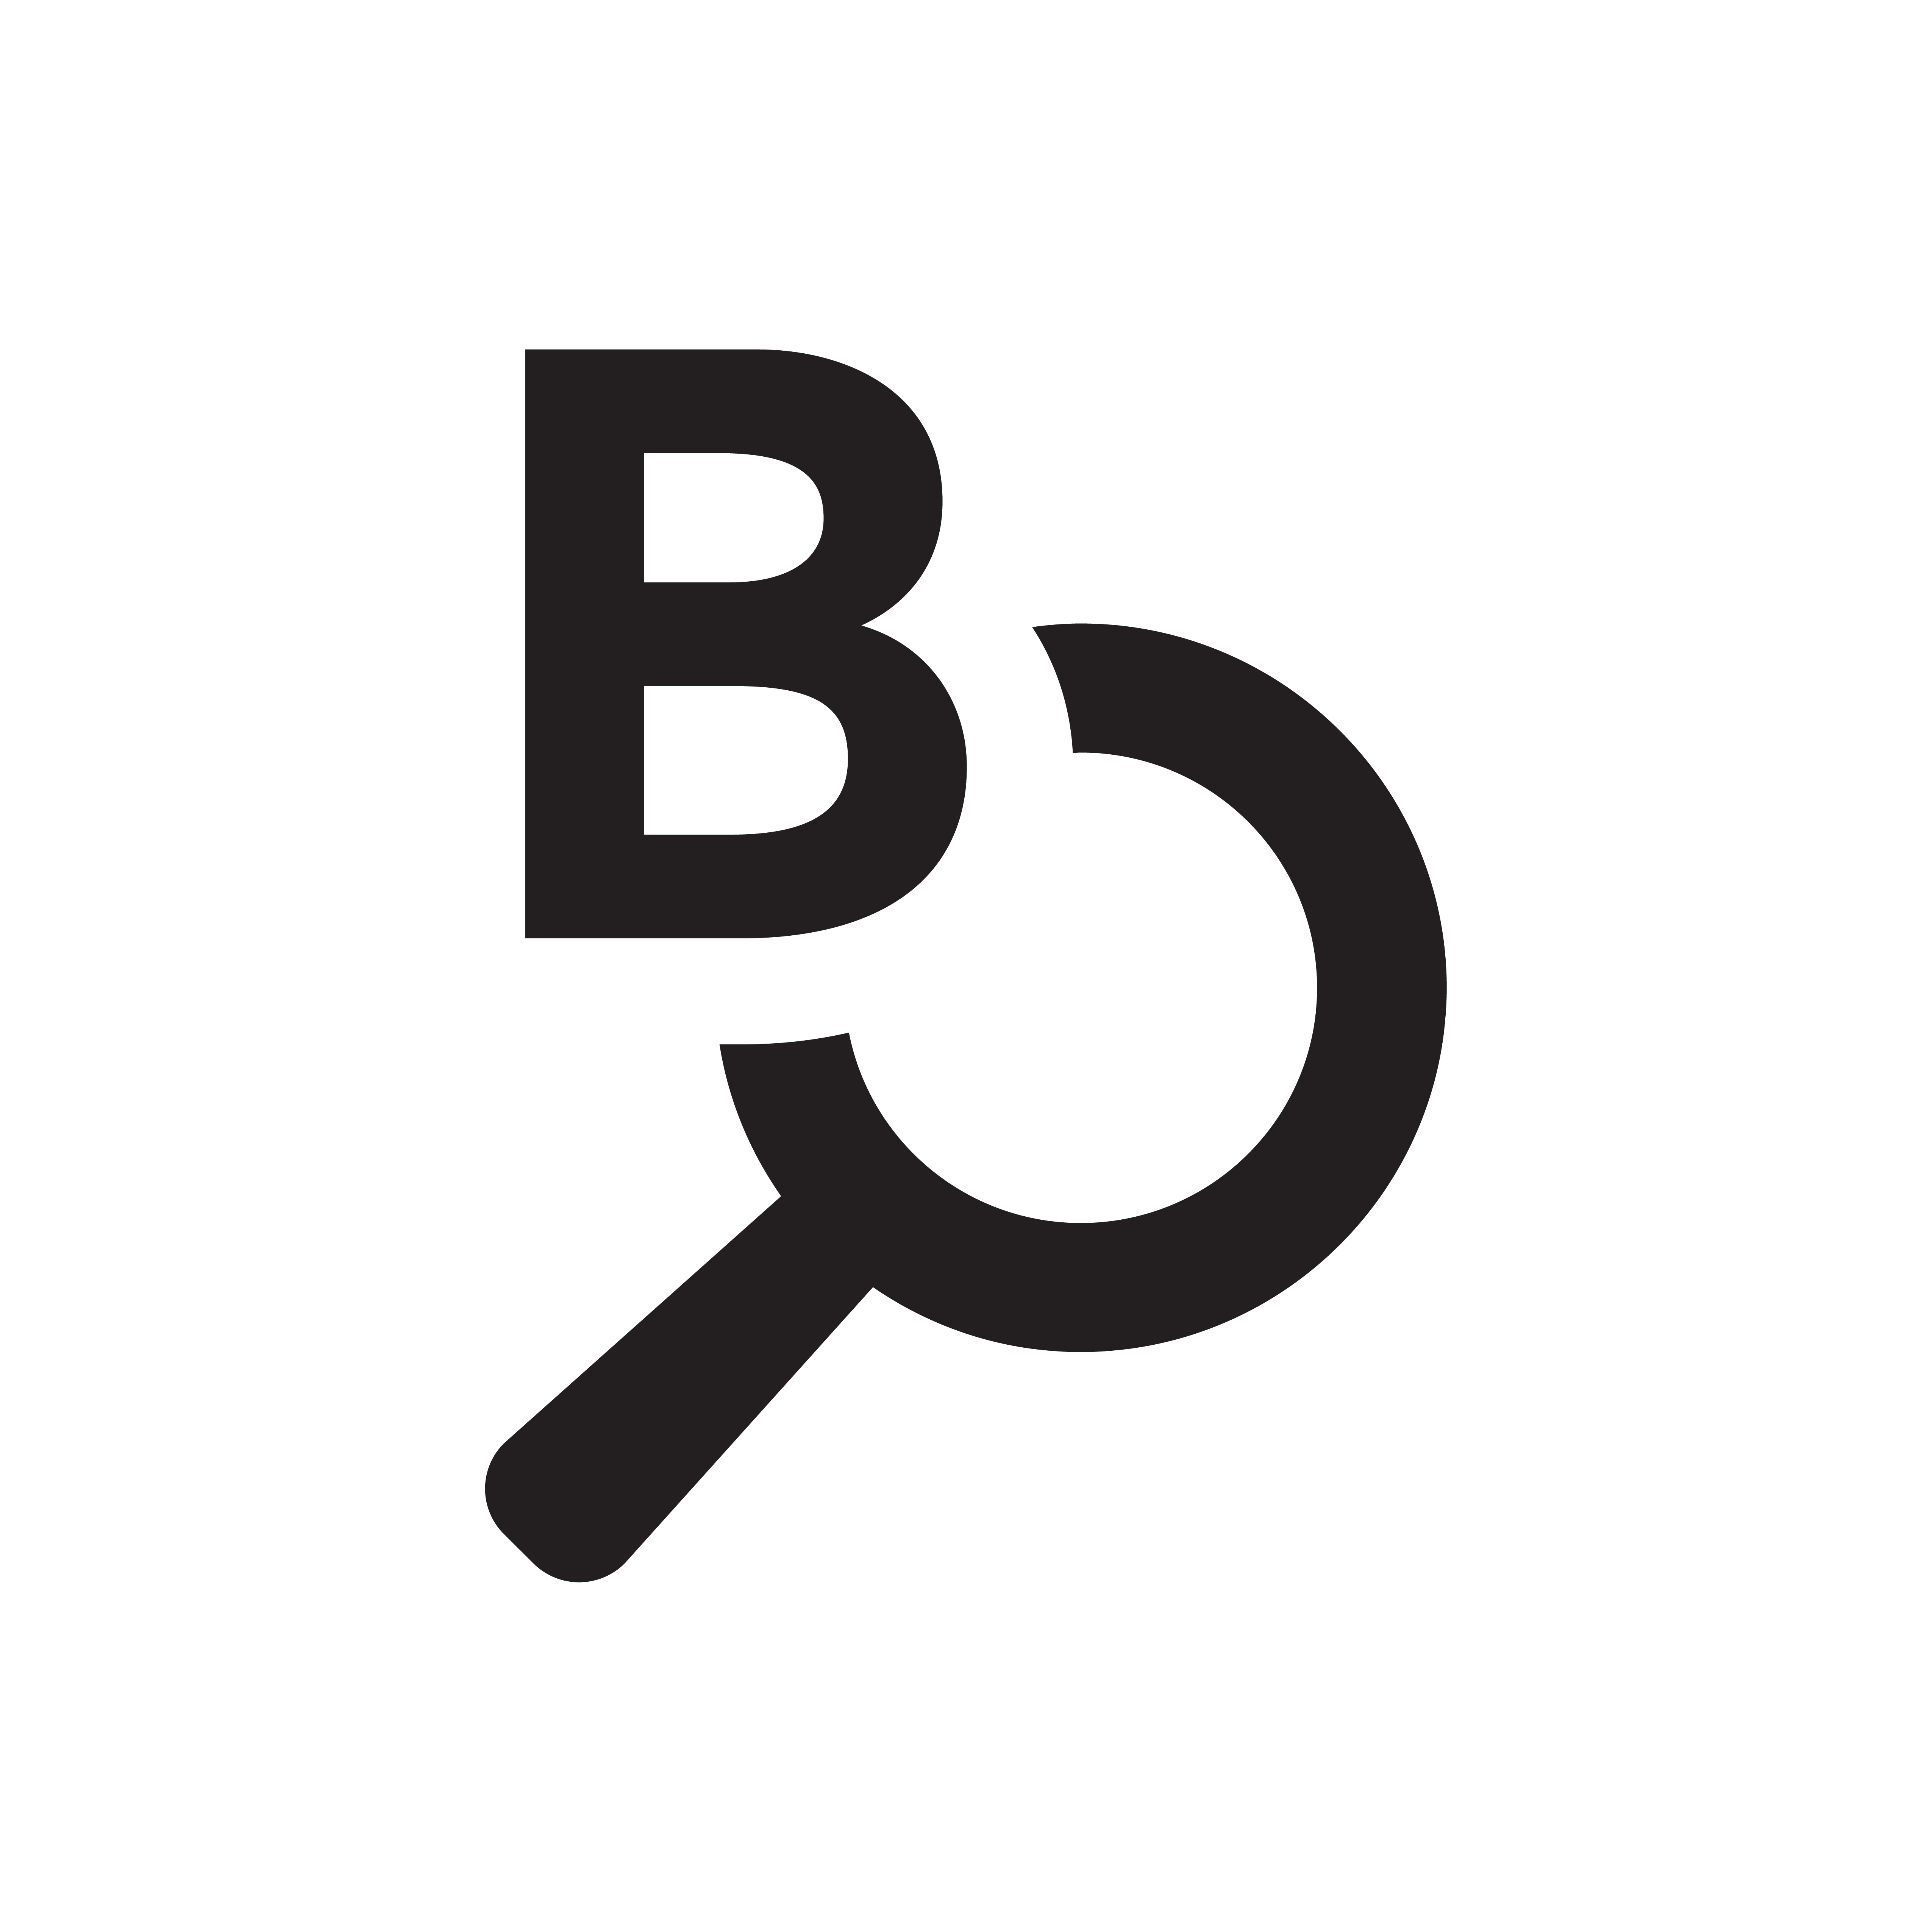 Logo with a "B" and a magnifying glass next to it.